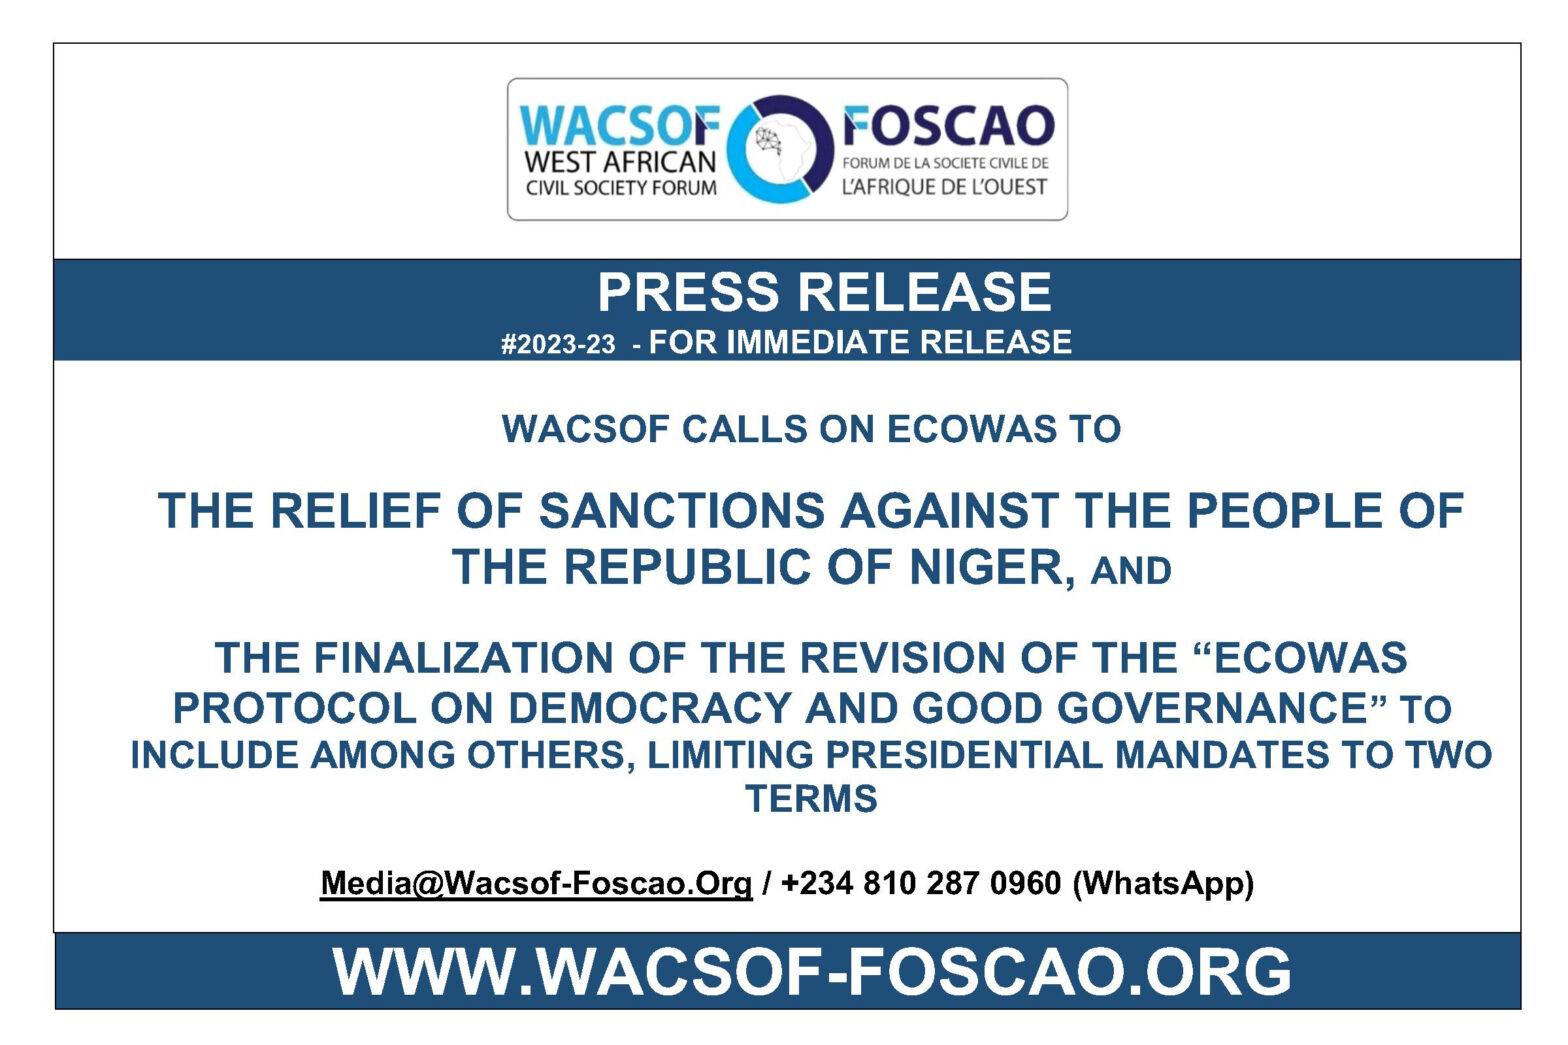 WACSOF CALLS FOR RELIEF OF SANCTIONS AGAINST THE PEOPLE OF NIGER, AND THE FINALIZATION OF THE REVISION OF THE “ECOWAS PROTOCOL ON DEMOCRACY & GOOD GOVERNANCE” TO INCLUDE, AMONG OTHERS, THE LIMITATION OF PRESIDENTIAL MANDATES TO 2 TERMS